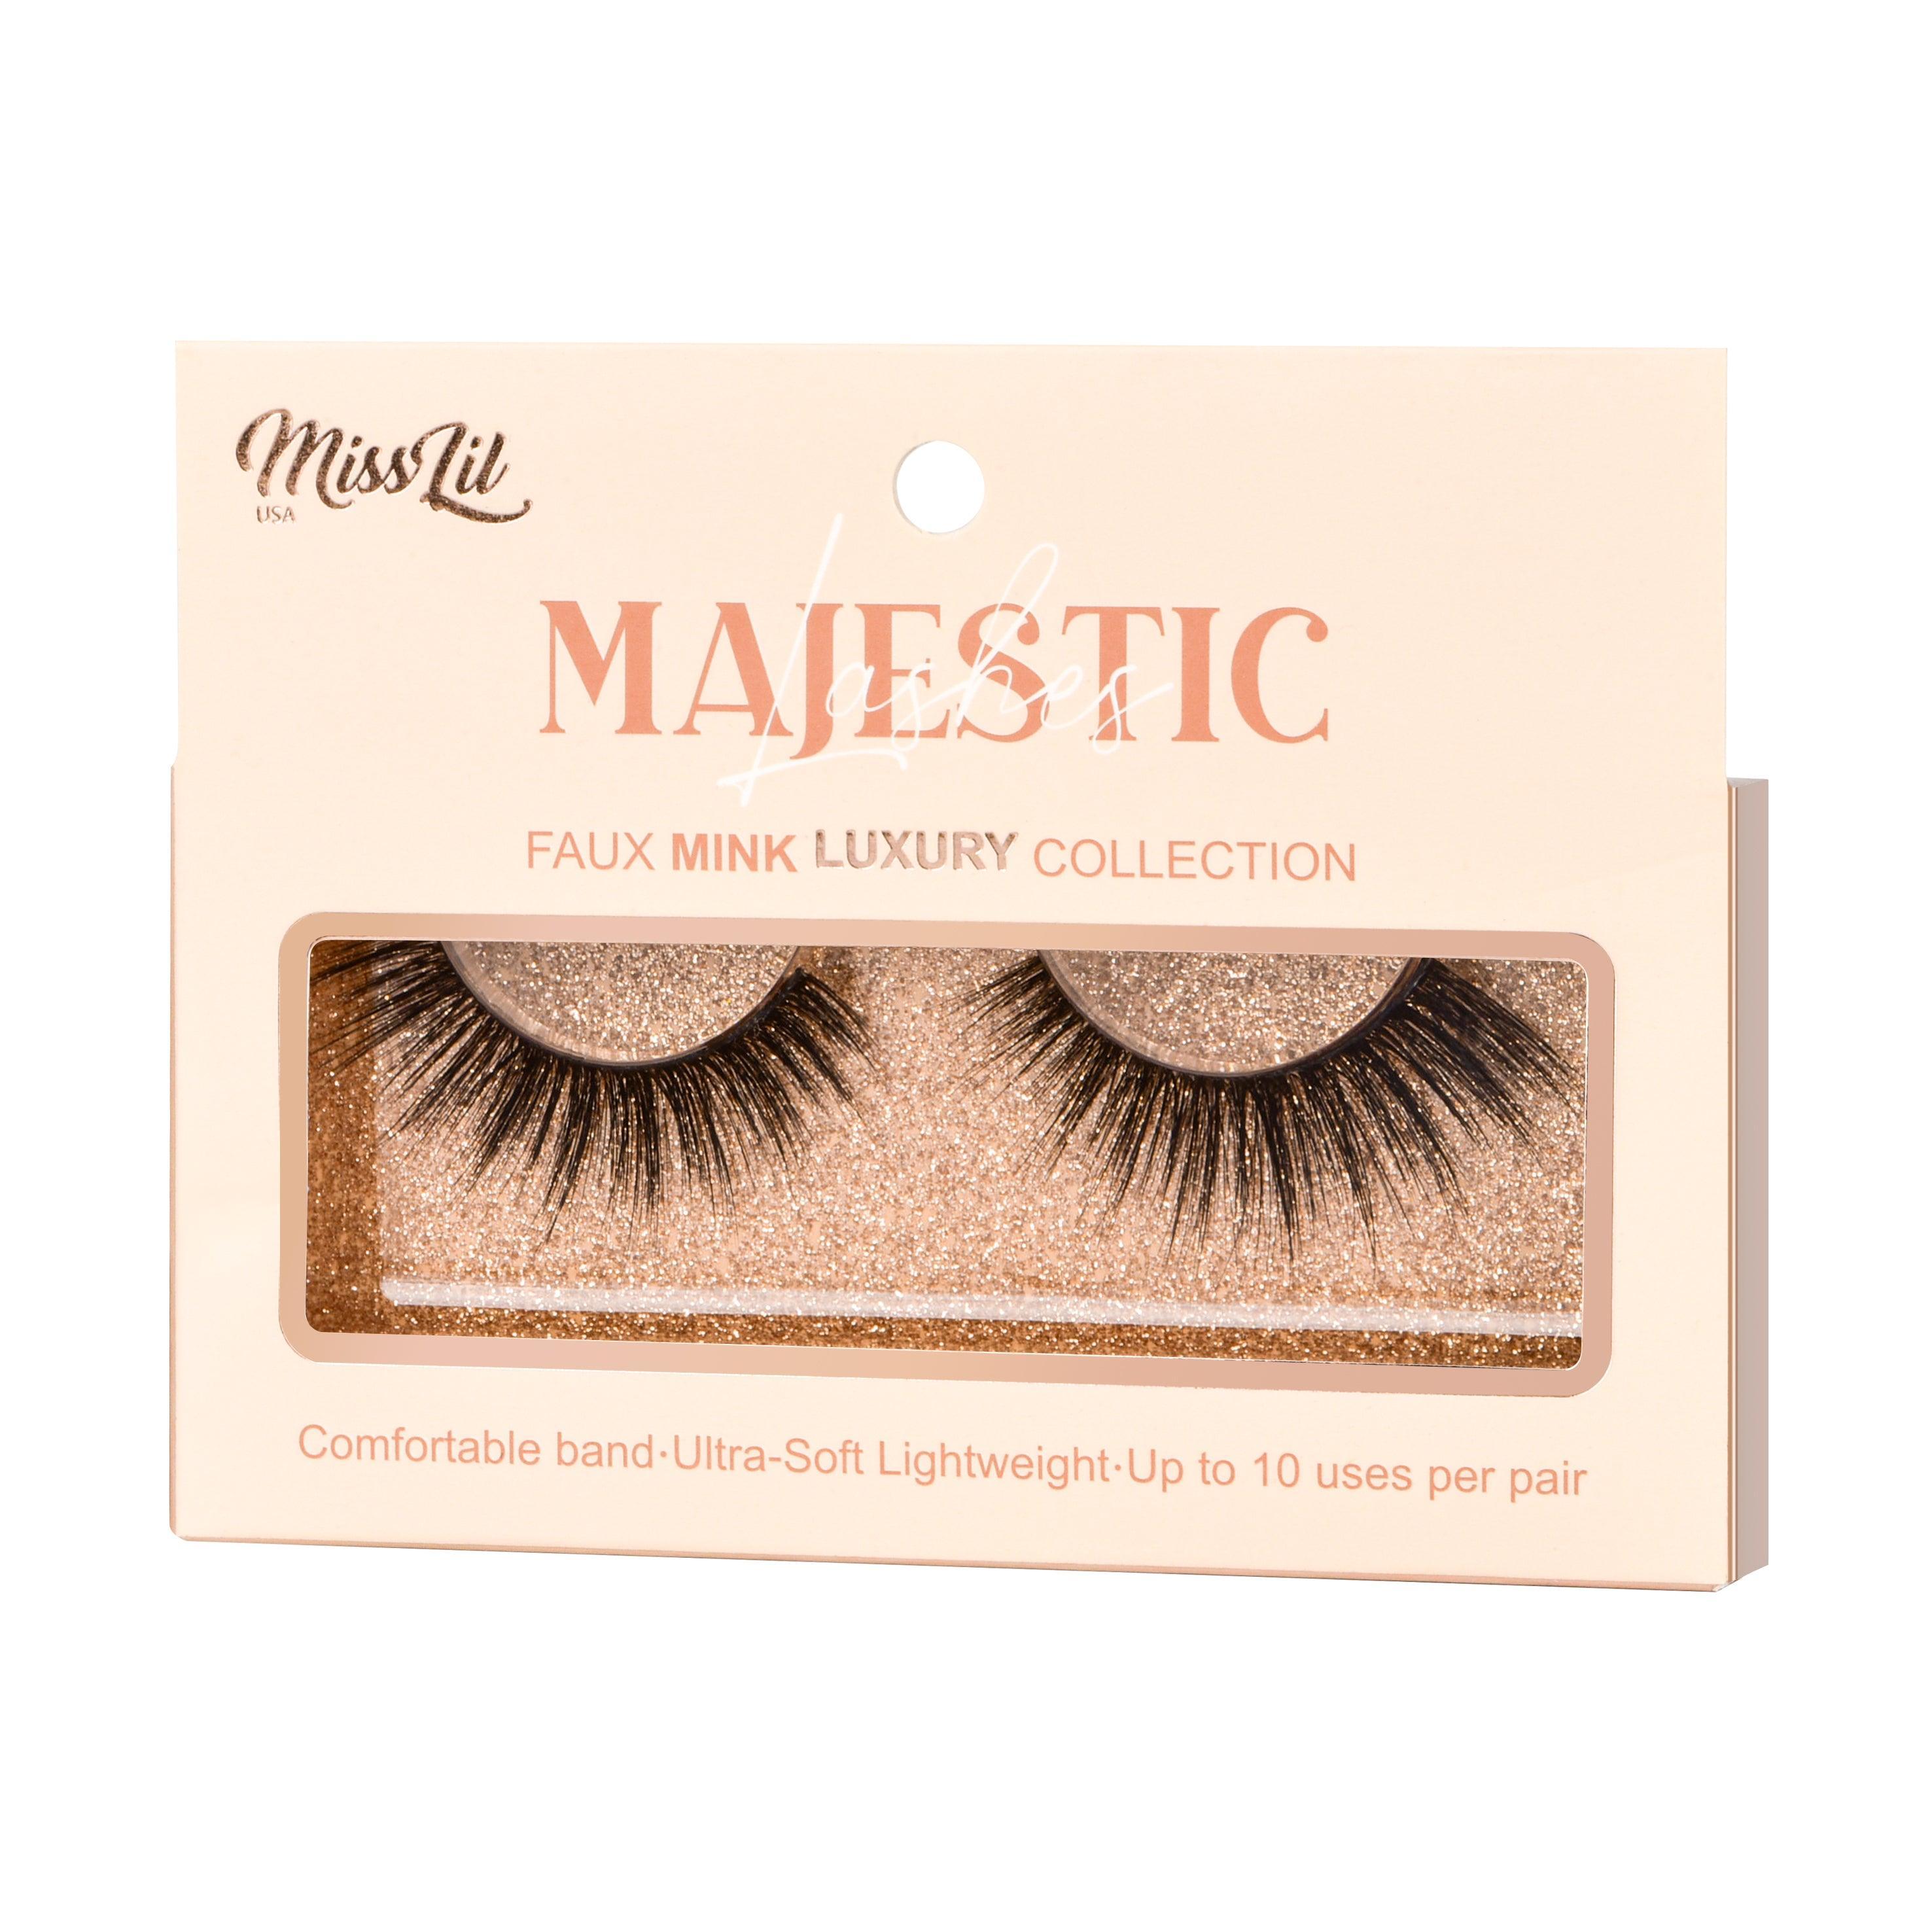 Majestic Collection 25 fake lashes - Miss Lil USA Wholesale